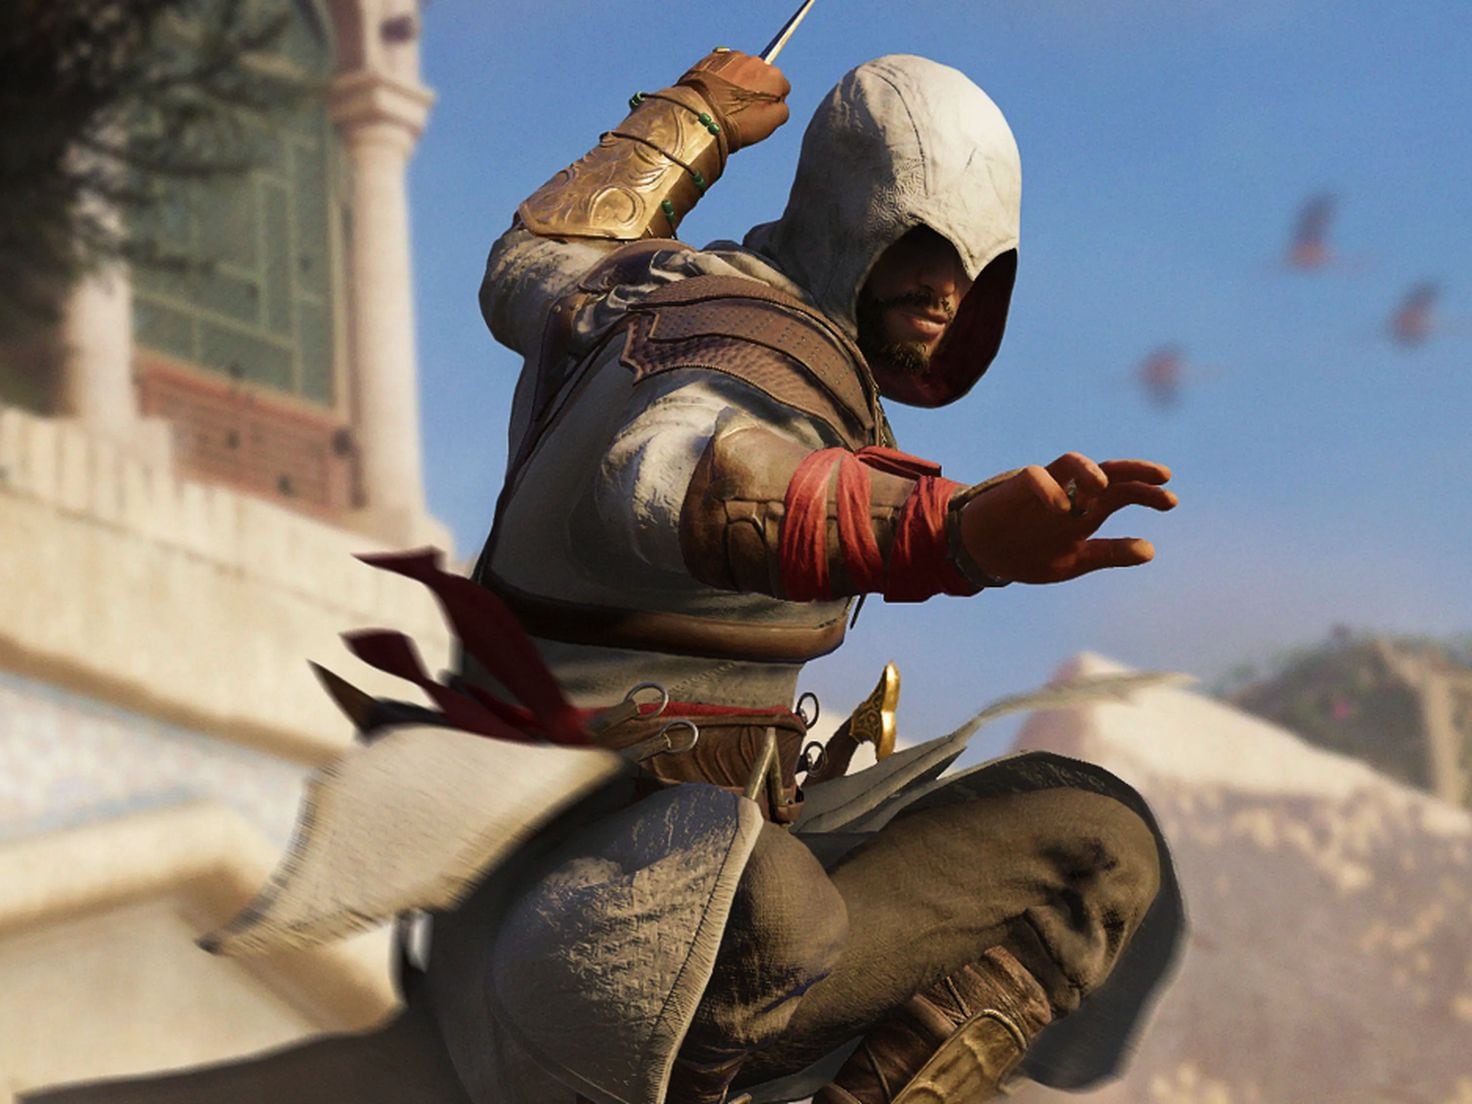 Assassin's Creed Mirage Launches October 12